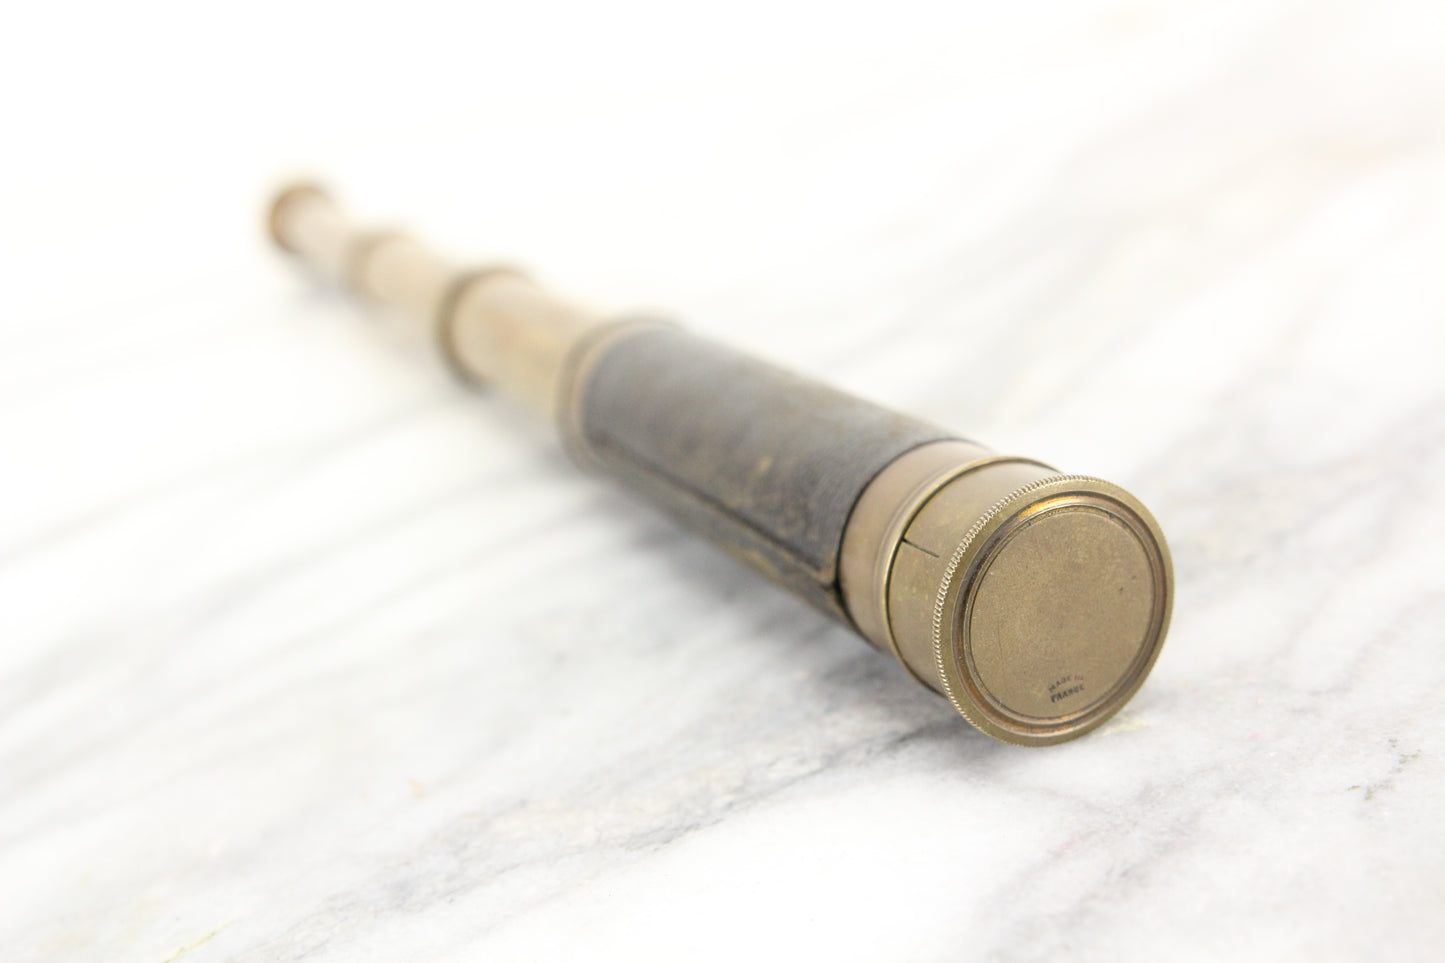 Brass Spyglass Hand-Held Telescope in Leather Case, Made in France